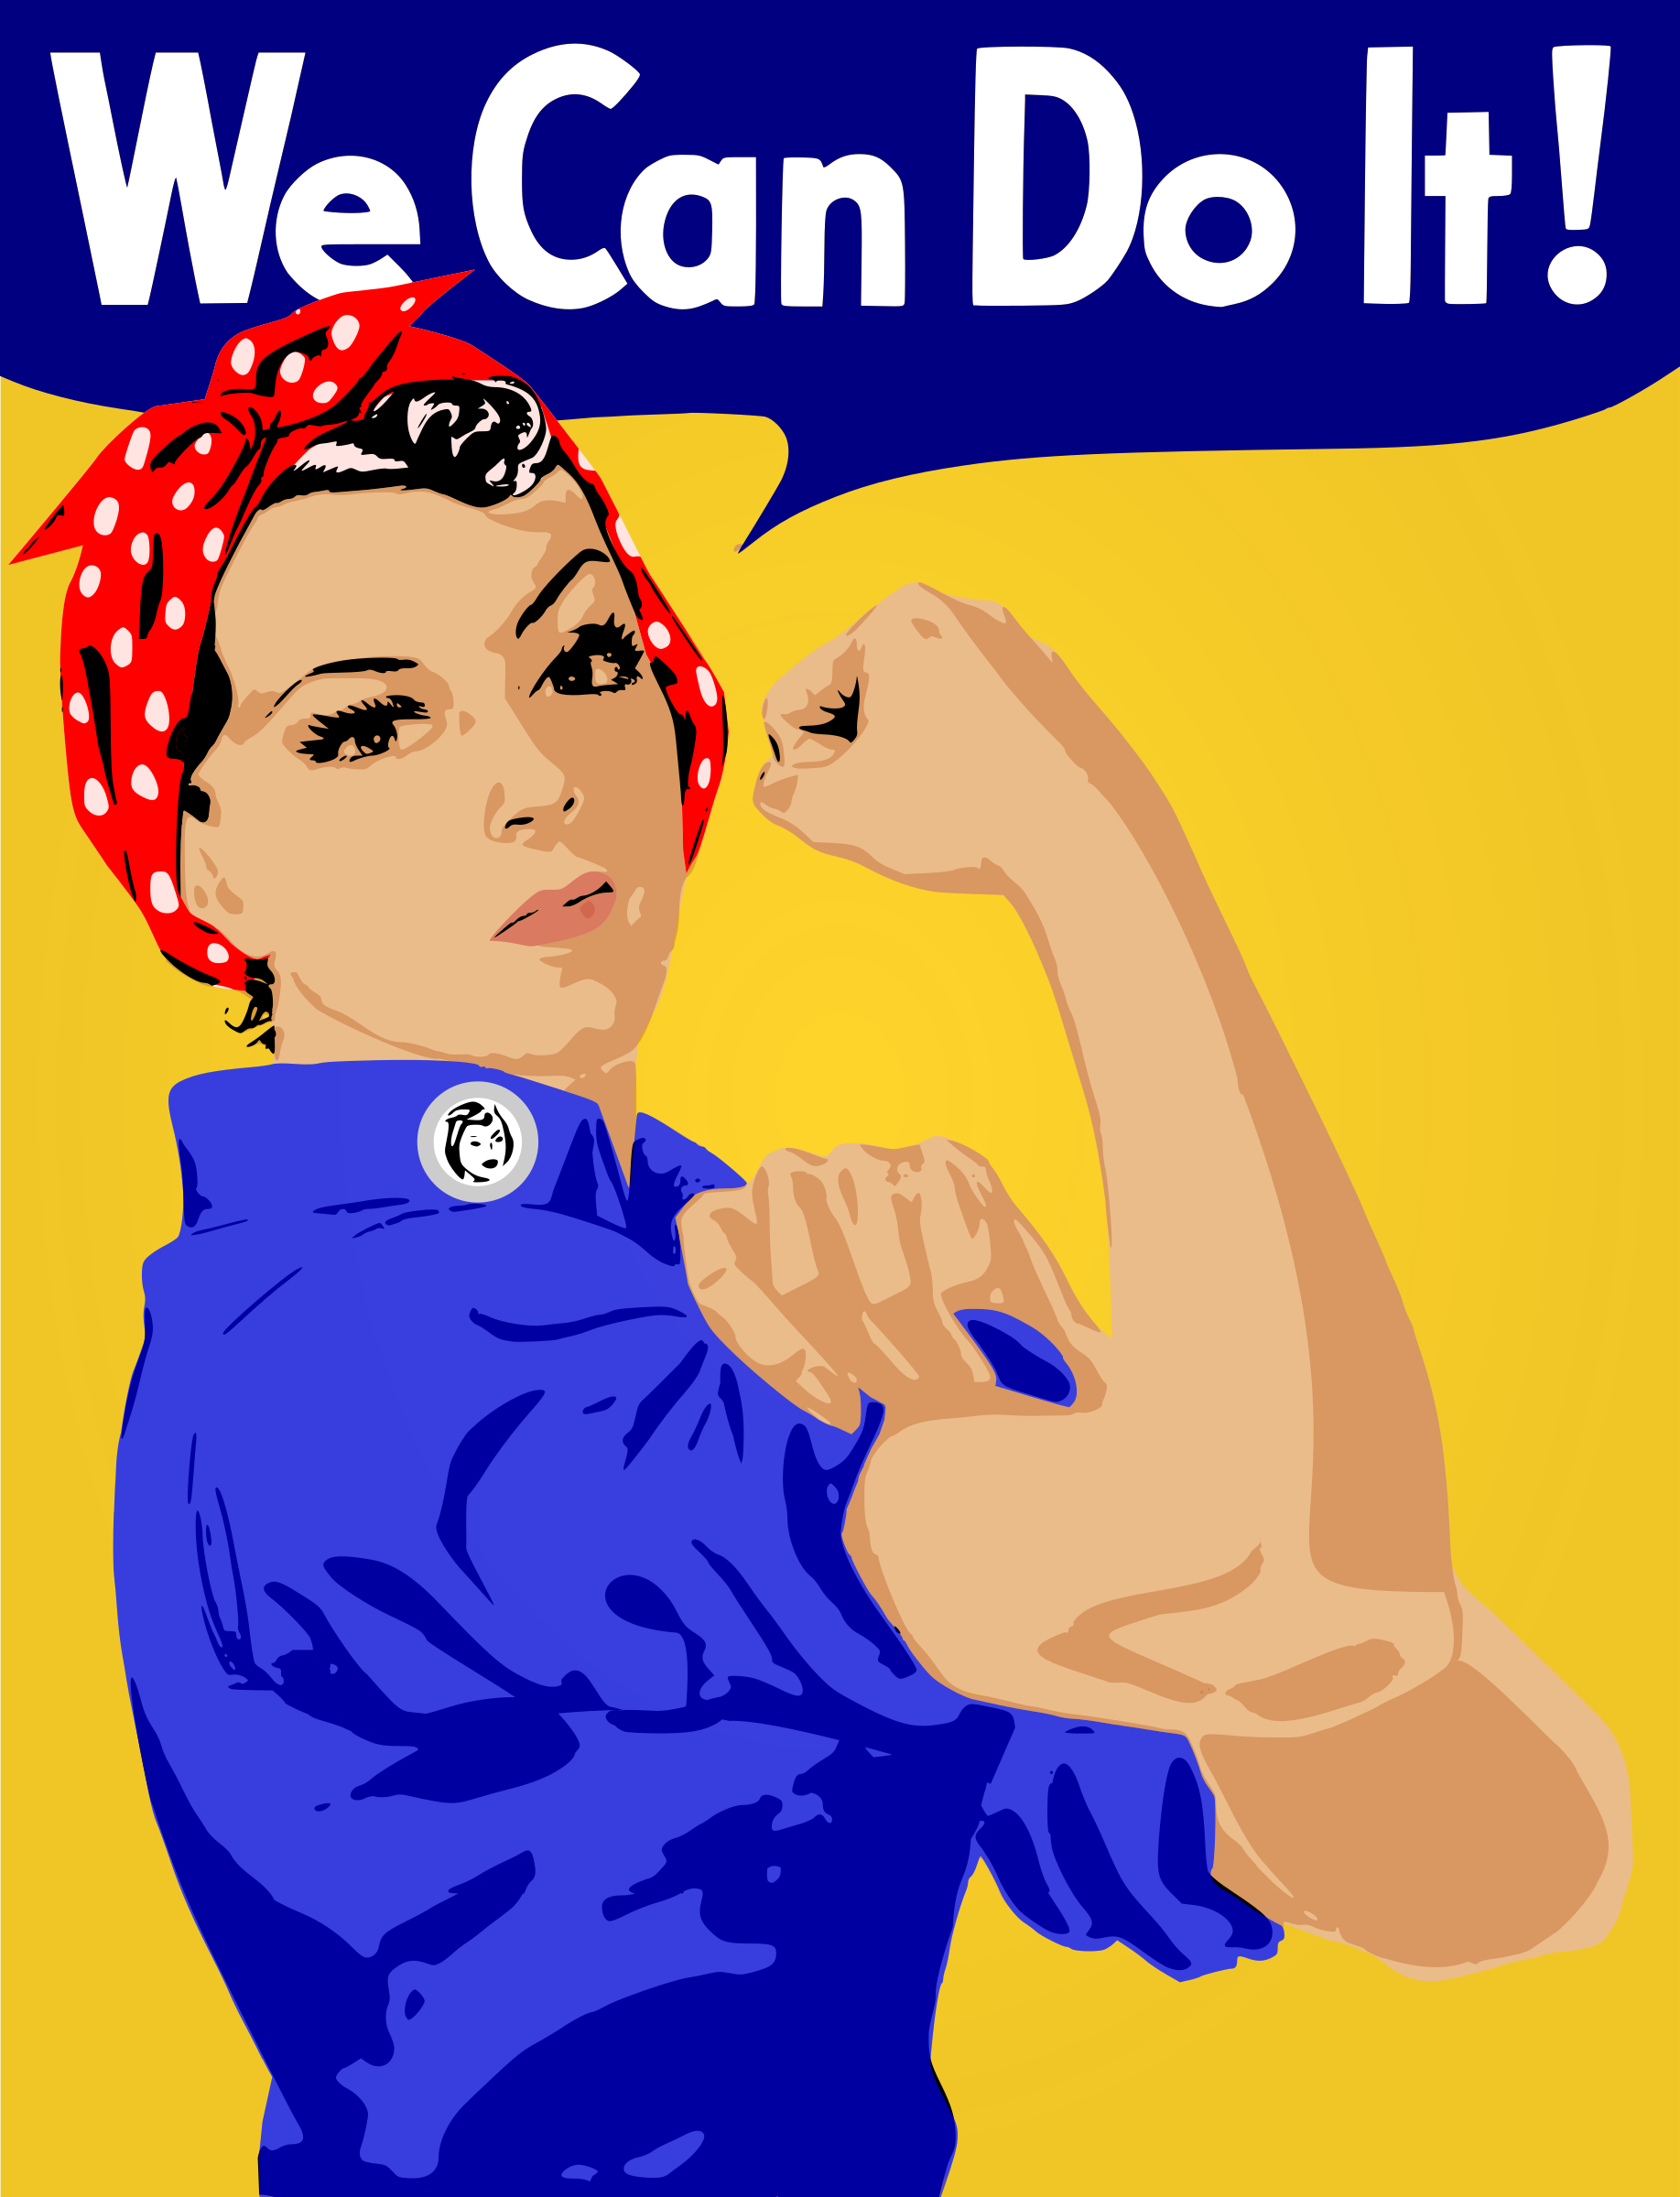 We Can Do It! Poster by worker